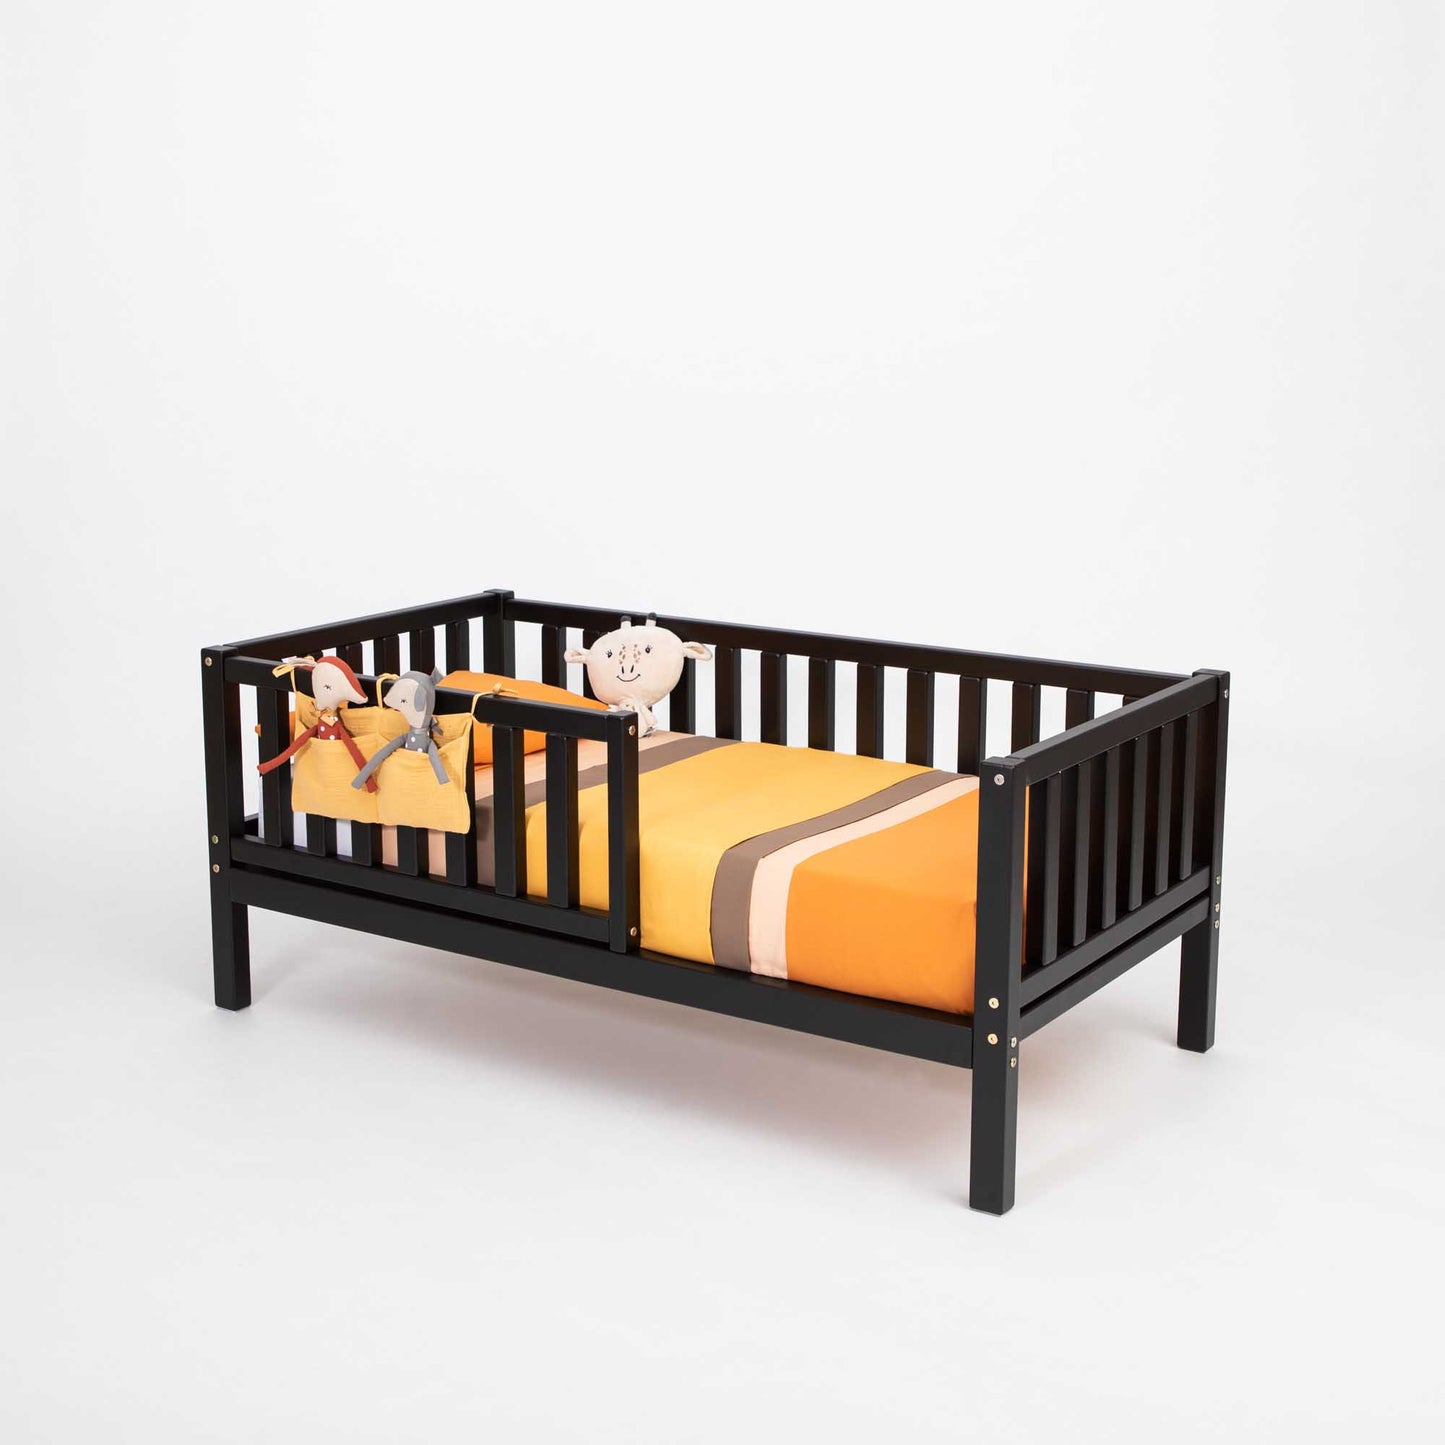 A Sweet Home From Wood toddler bed on legs with a fence, with an orange and black striped sheet, perfect for independent sleeping. This children's bed is both comfortable and stylish.